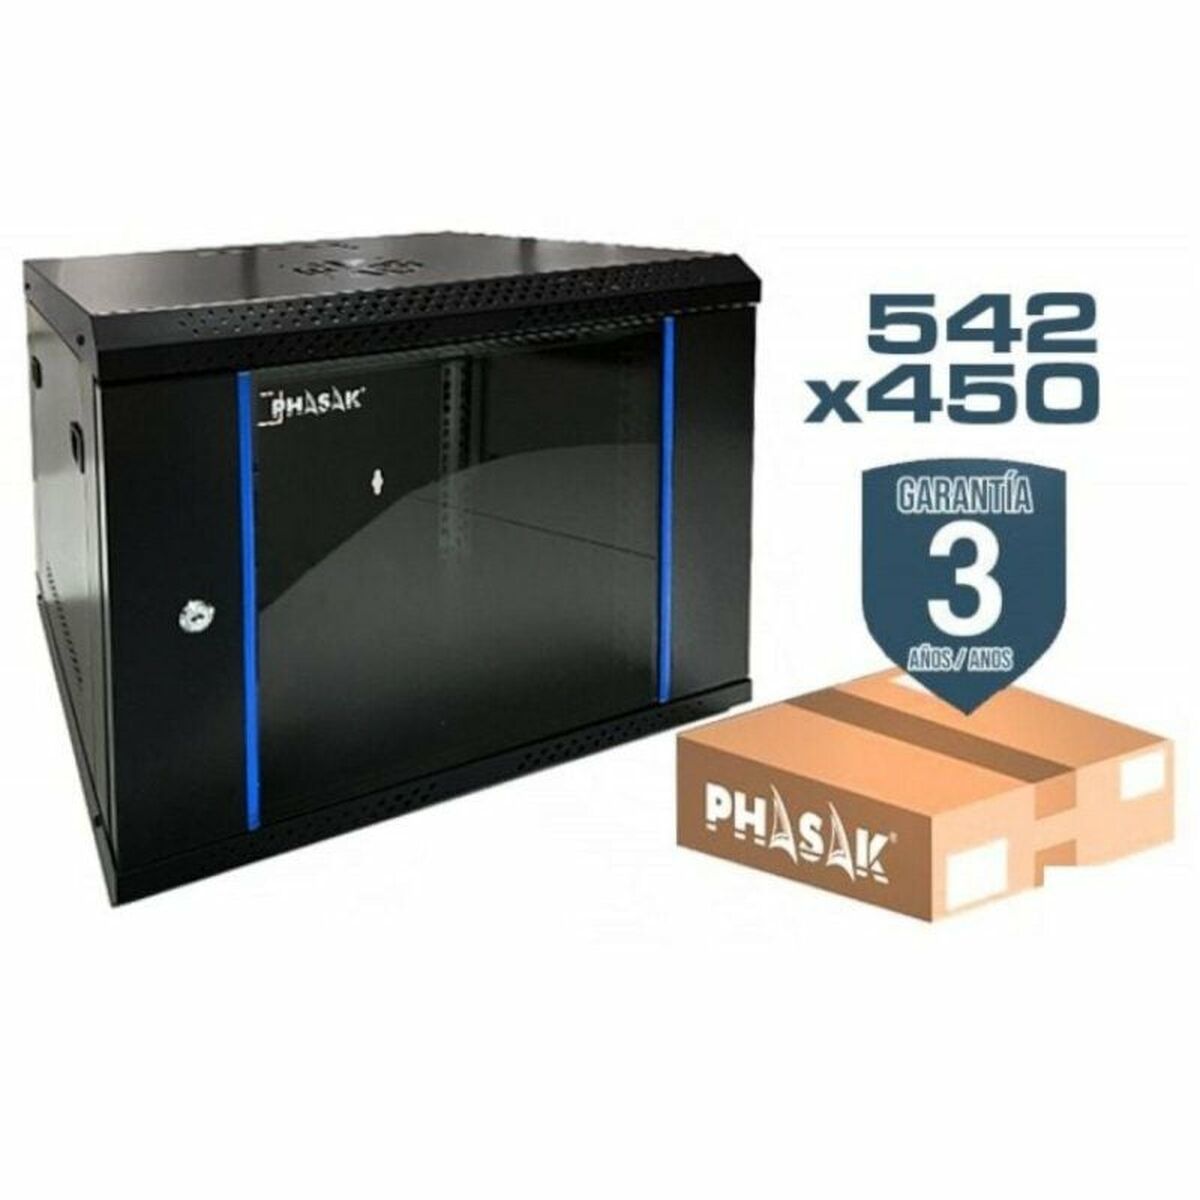 Wall-mounted Rack Cabinet Phasak PHO 2216D, Phasak, Computing, Accessories, wall-mounted-rack-cabinet-phasak-pho-2216d, Brand_Phasak, category-reference-2609, category-reference-2803, category-reference-2828, category-reference-t-19685, category-reference-t-19908, category-reference-t-21349, Condition_NEW, furniture, networks/wiring, organisation, Price_100 - 200, Teleworking, RiotNook